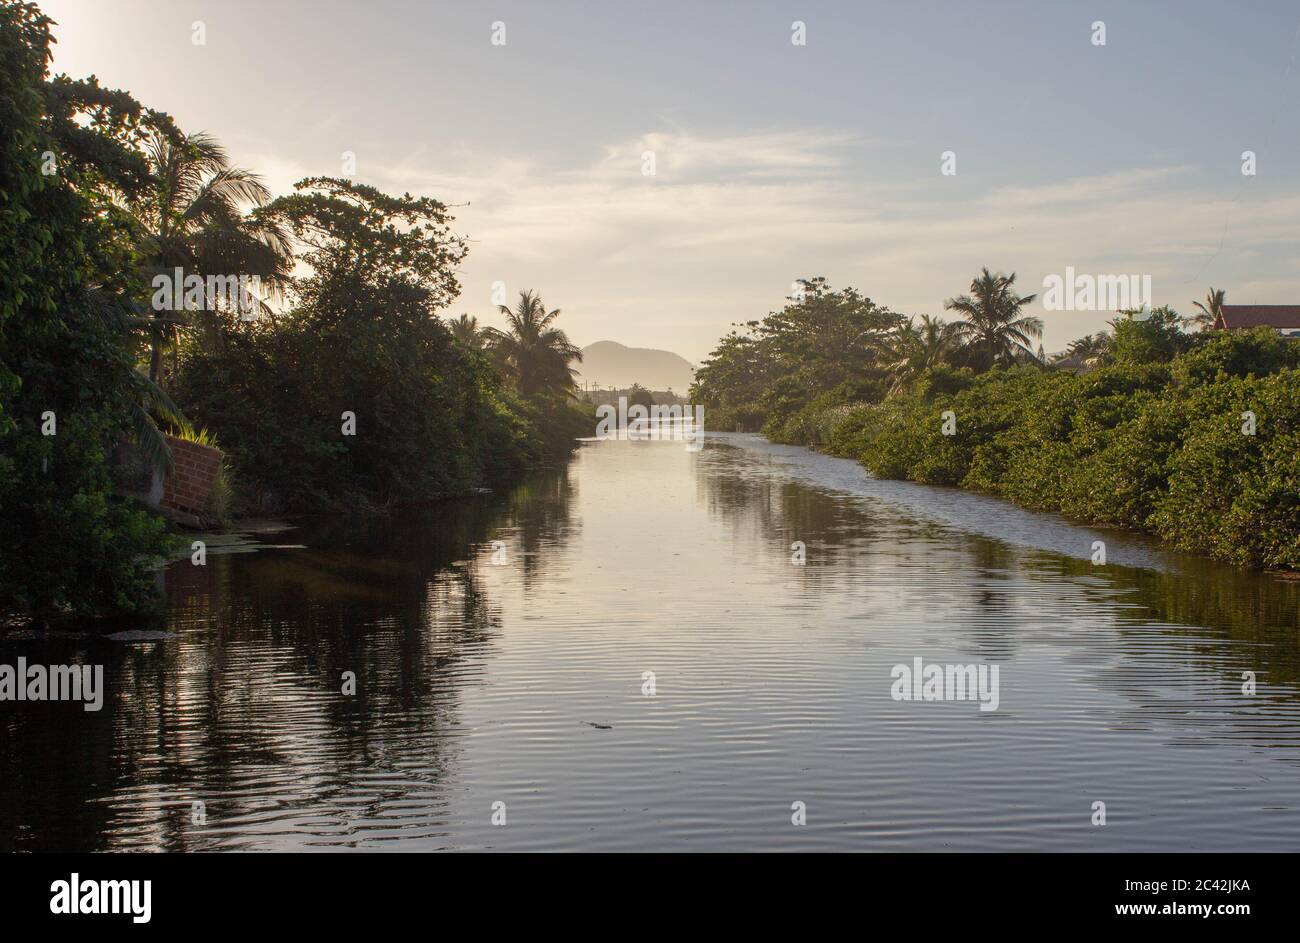 City canal of Itaipuaçu, Rio de Janeiro, during the sunset with beautiful reflexions on the water Stock Photo